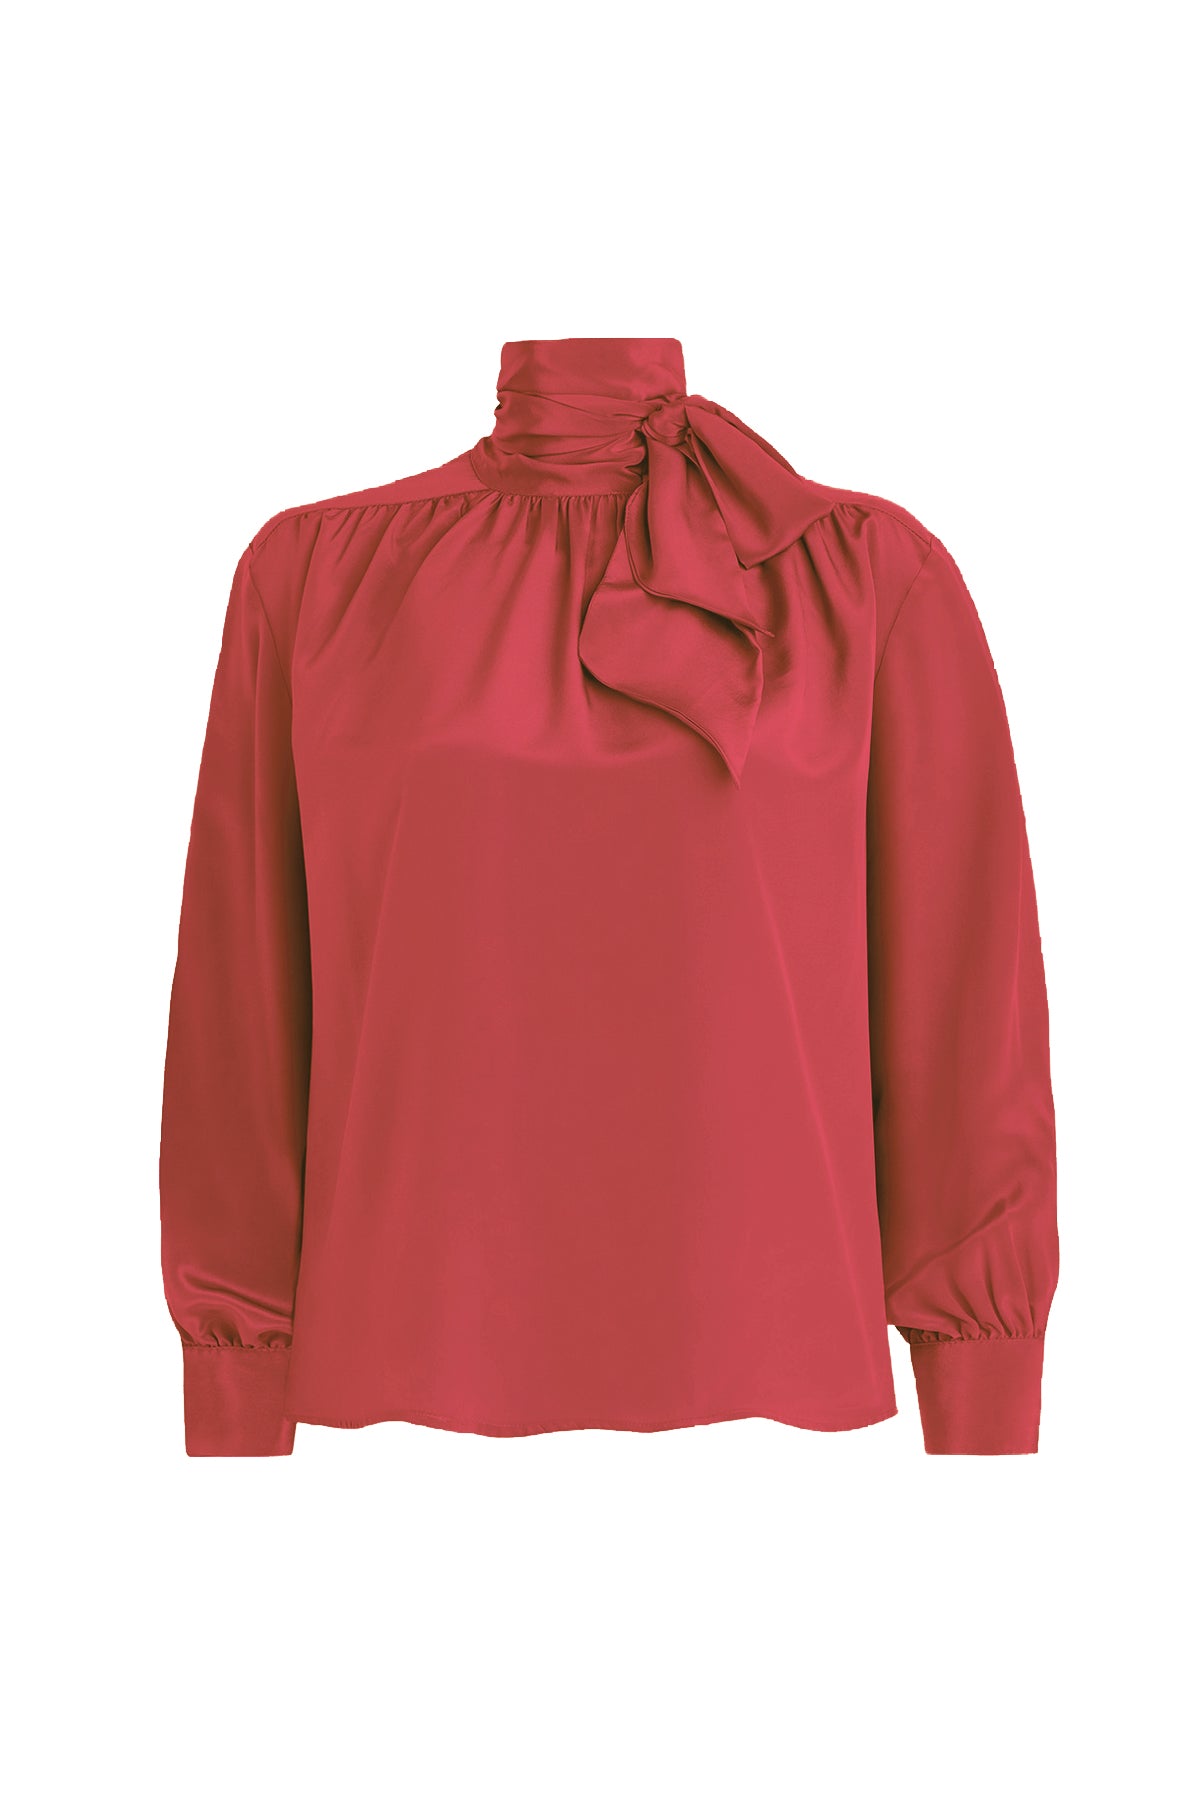 Tie neck blouse in coral - plus size